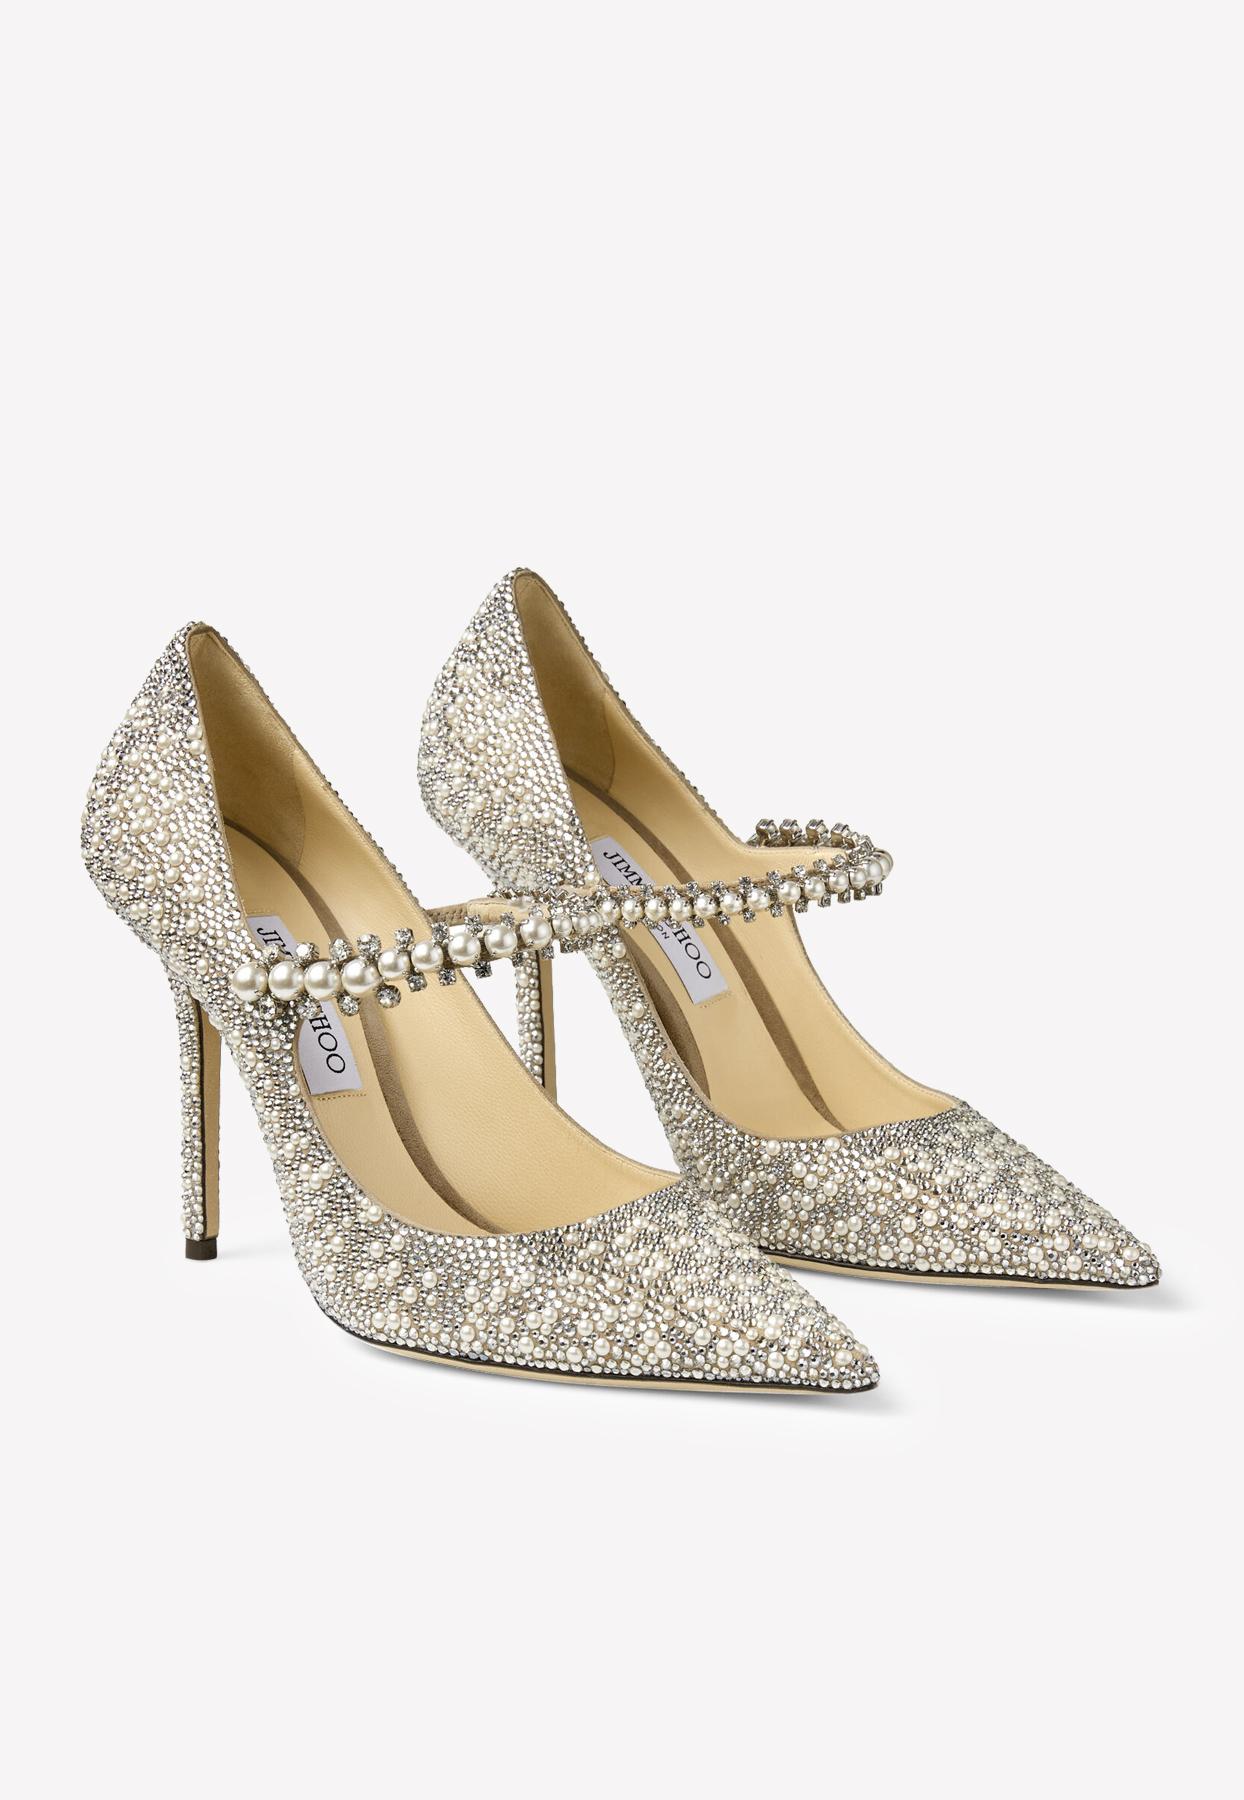 Jimmy Choo Baily 100 Suede Crystal-embellished Mary Jane Pumps in Metallic  | Lyst